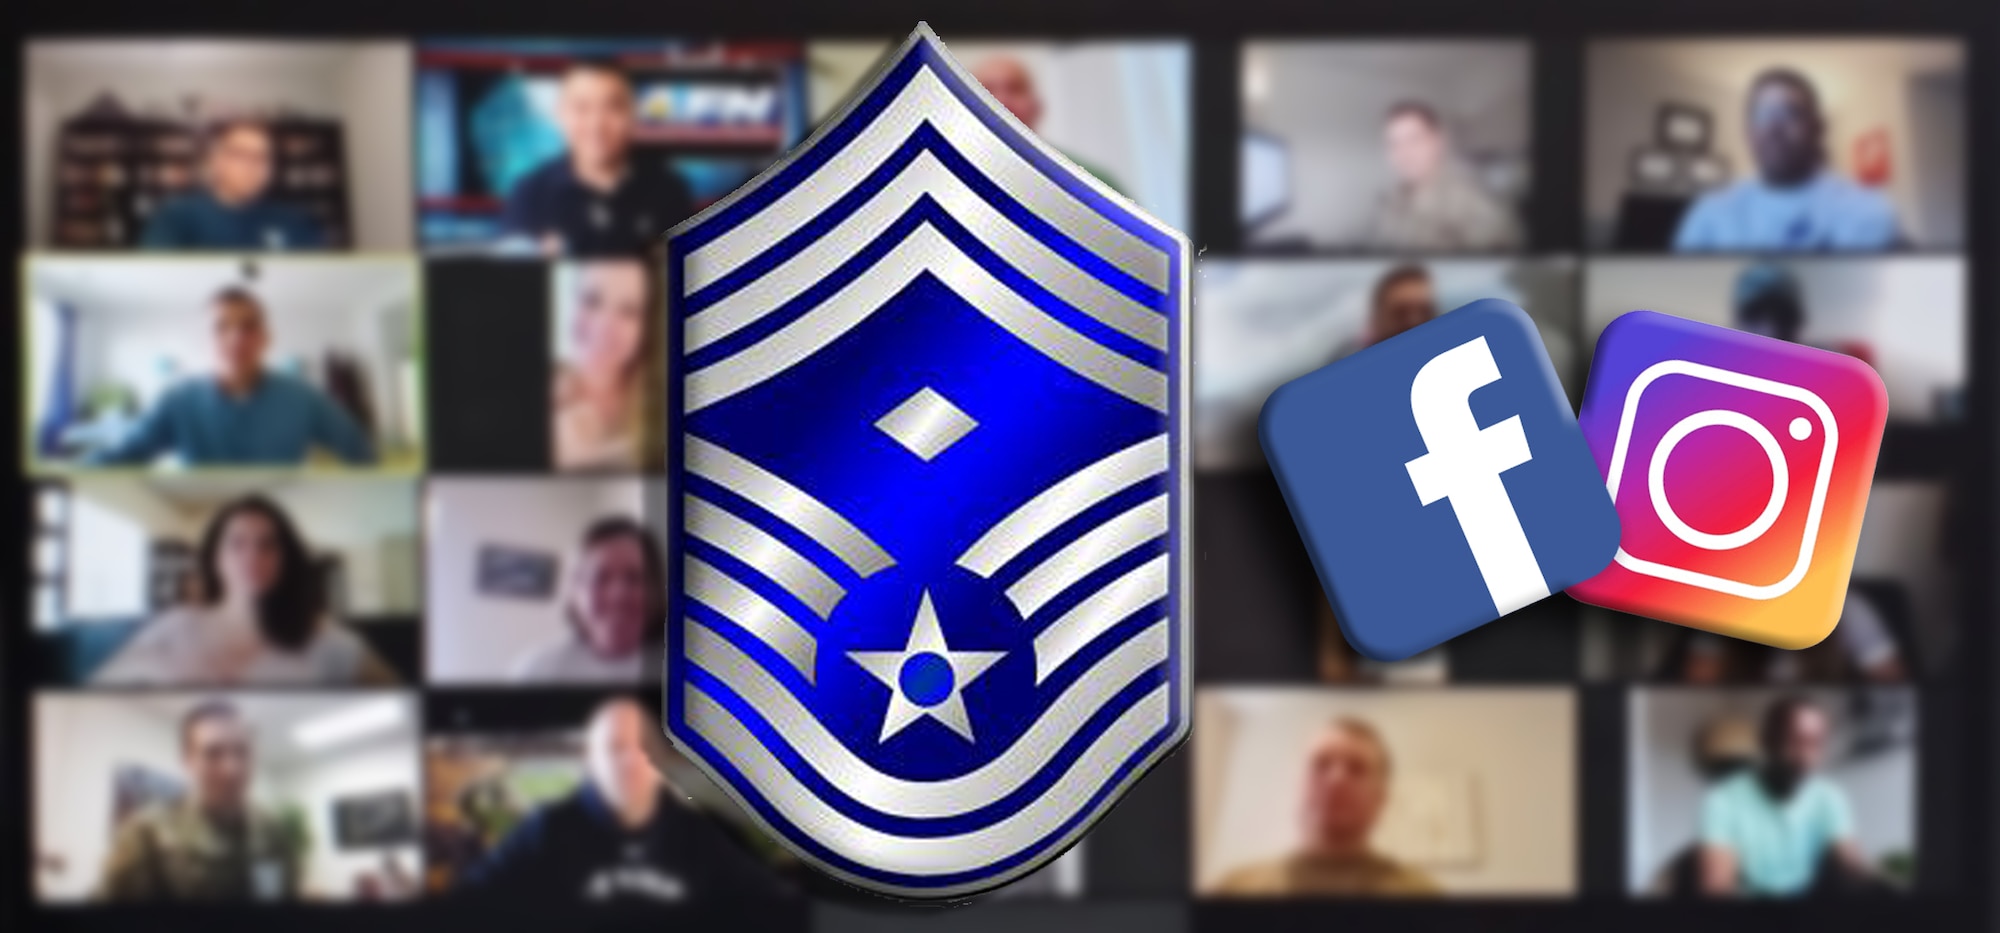 CMSgt, First Sergeant stripes with the Facebook and Instagram logo on a collage of video conferencing screenshots